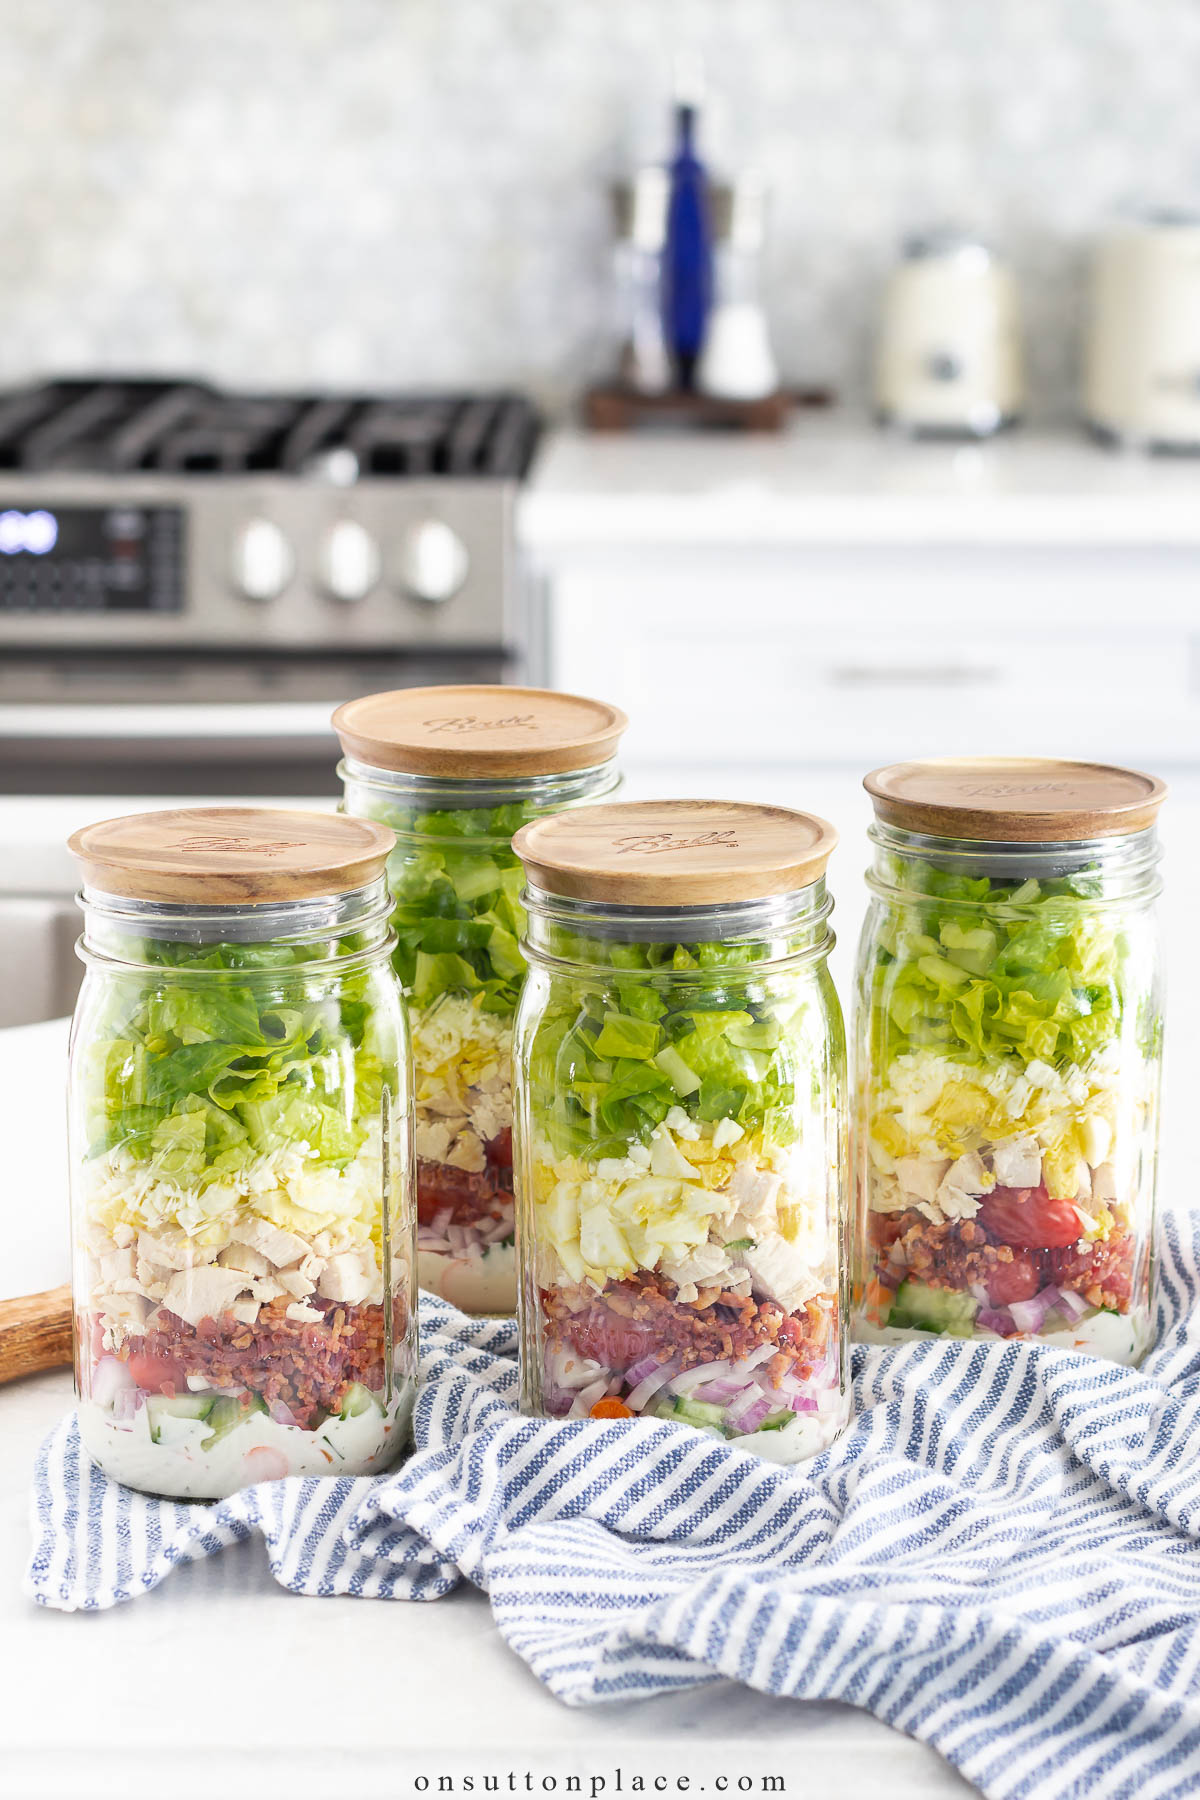 https://www.onsuttonplace.com/wp-content/uploads/2023/04/meal-prep-salads-in-mason-jars-with-wood-lids.jpg